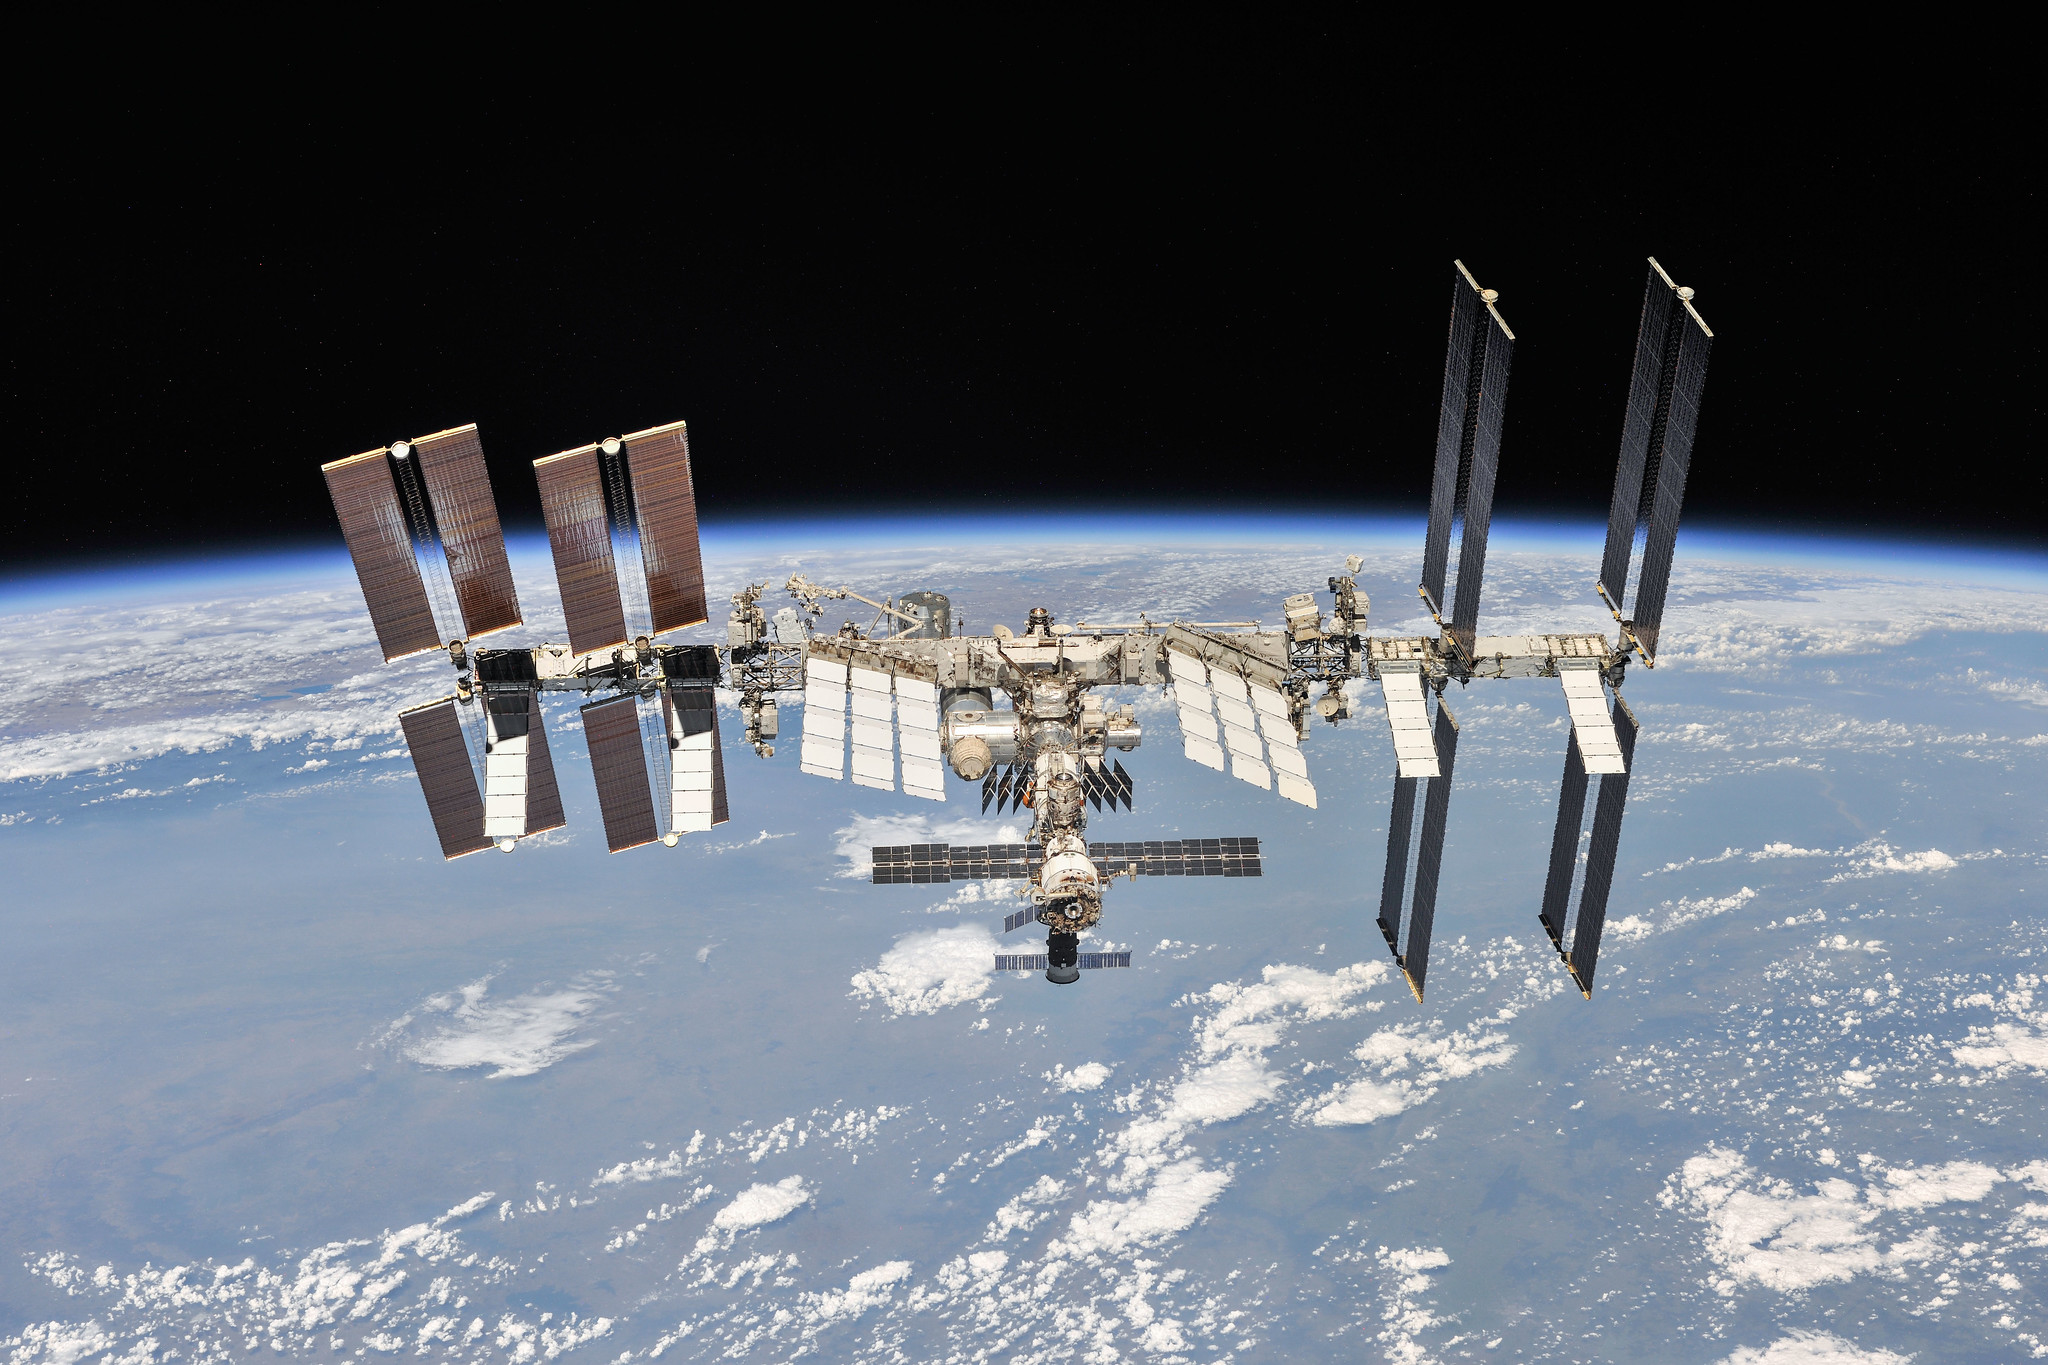 NASA, ESA, Japan and Canada will use the ISS until 2030, then sink the station into the ocean